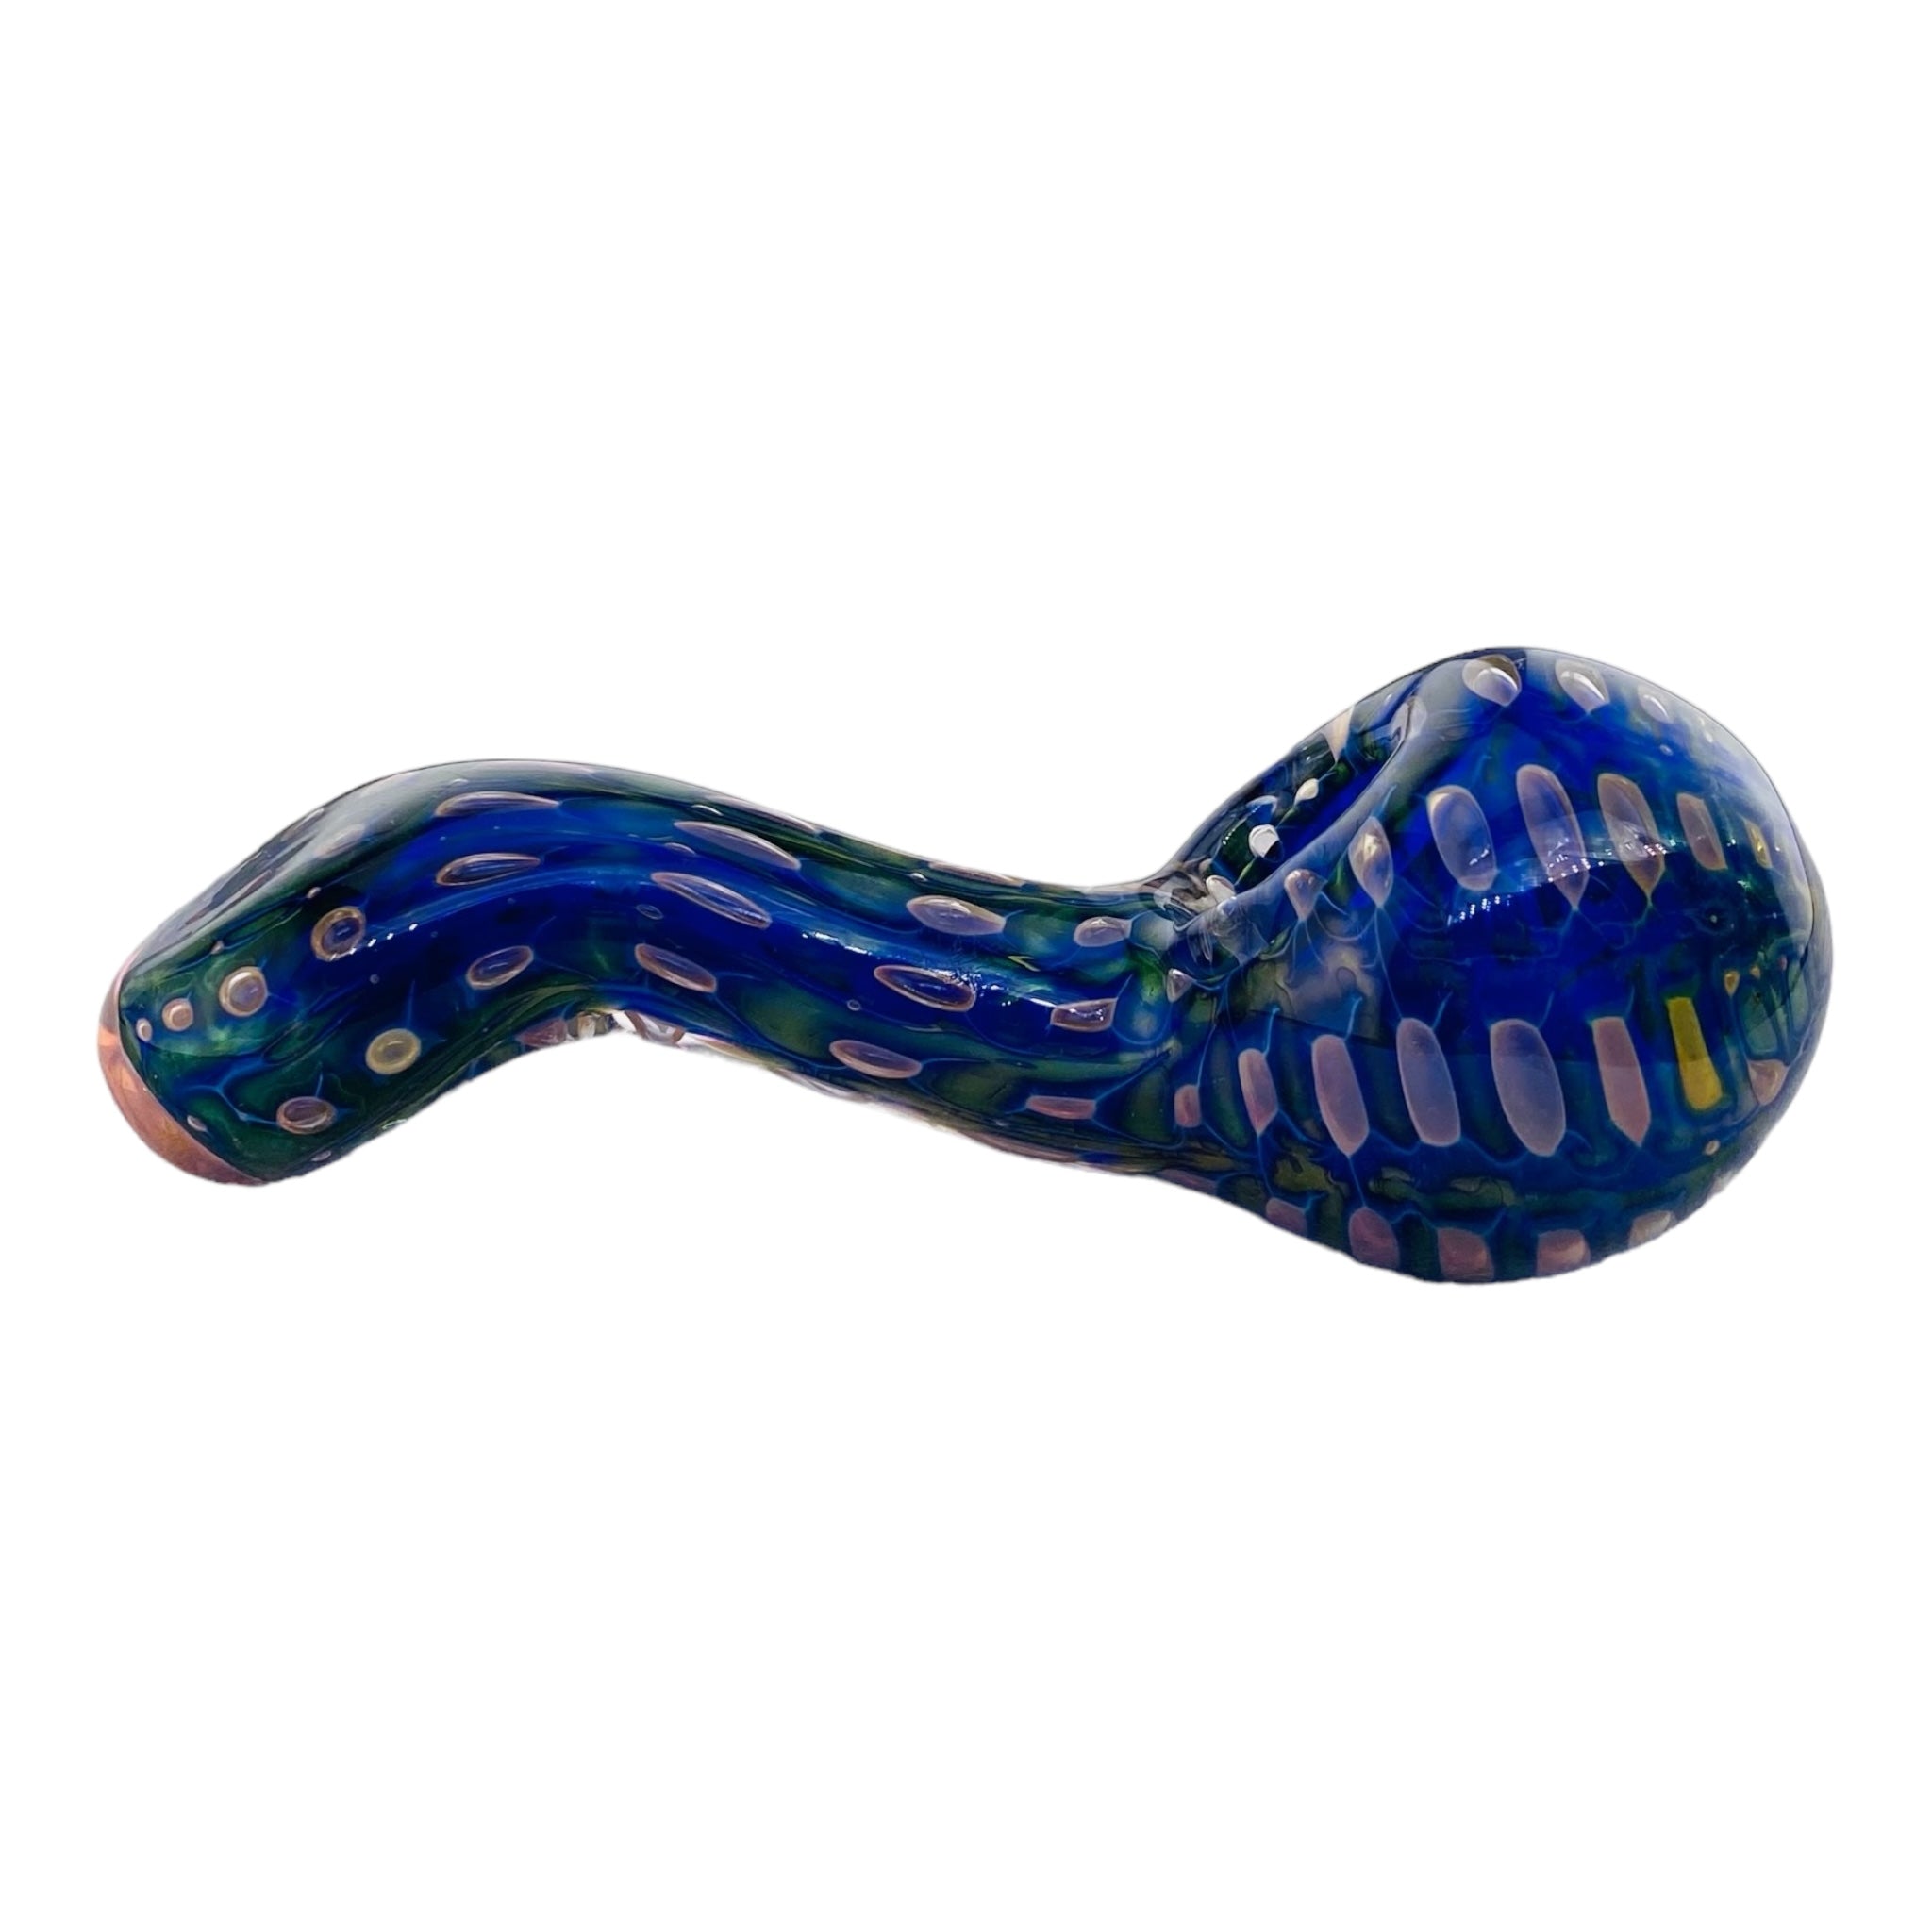 glass sherlock smoking pipe for weed or tobacco for sale